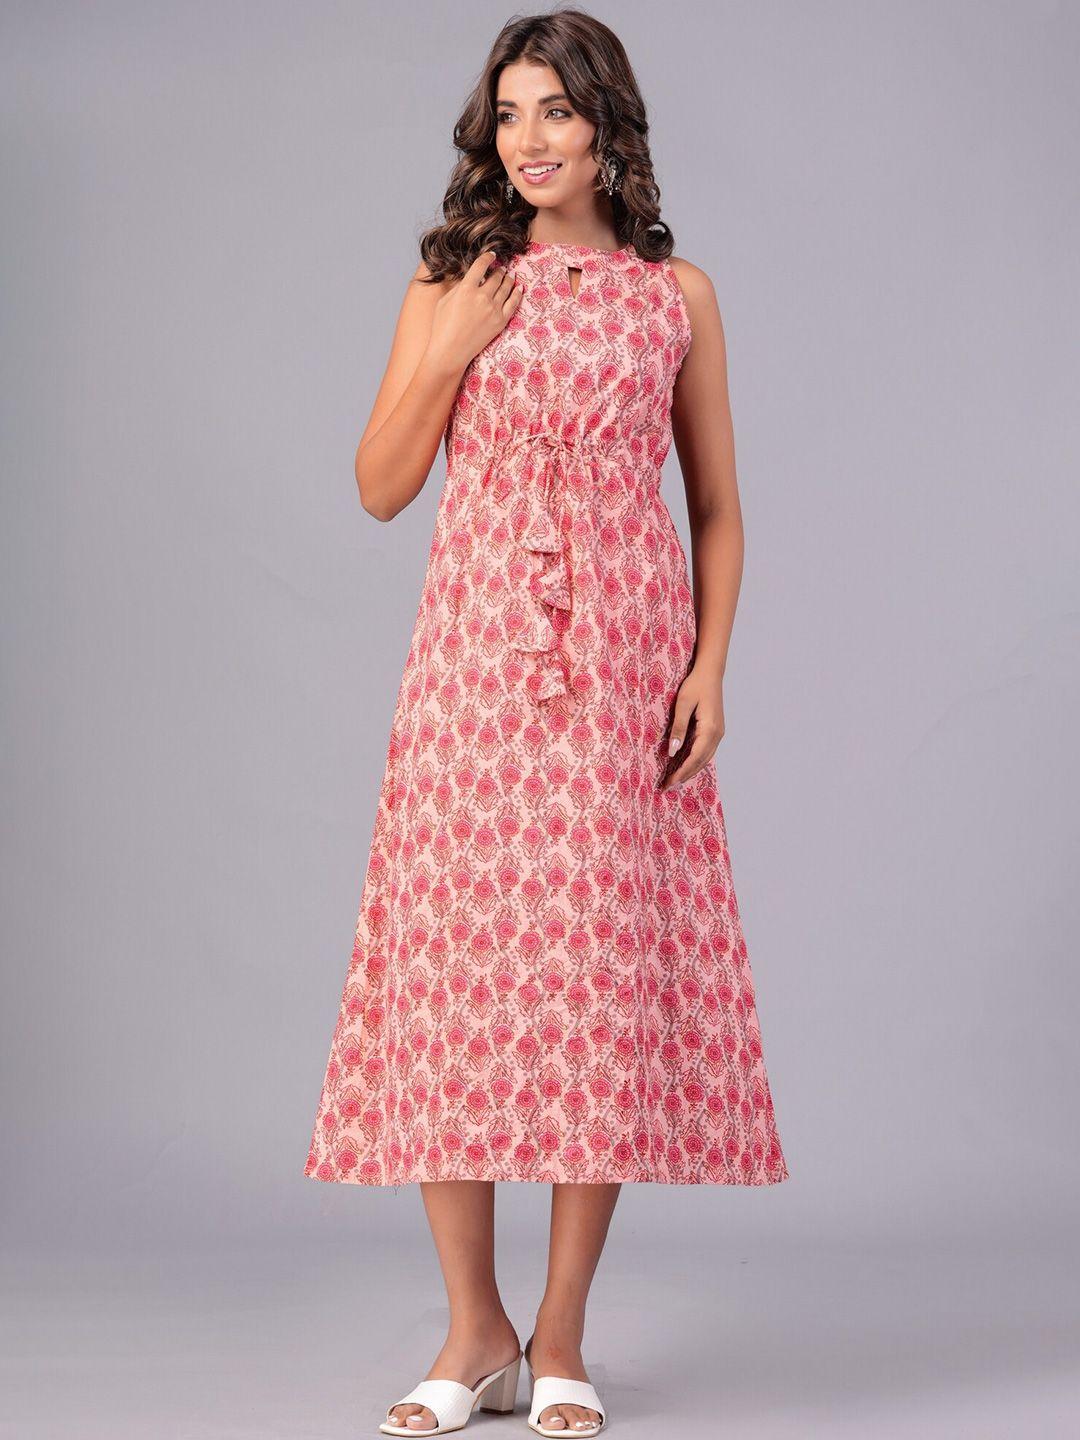 etnicawear floral printed pure cotton midi fit & flare ethnic dress